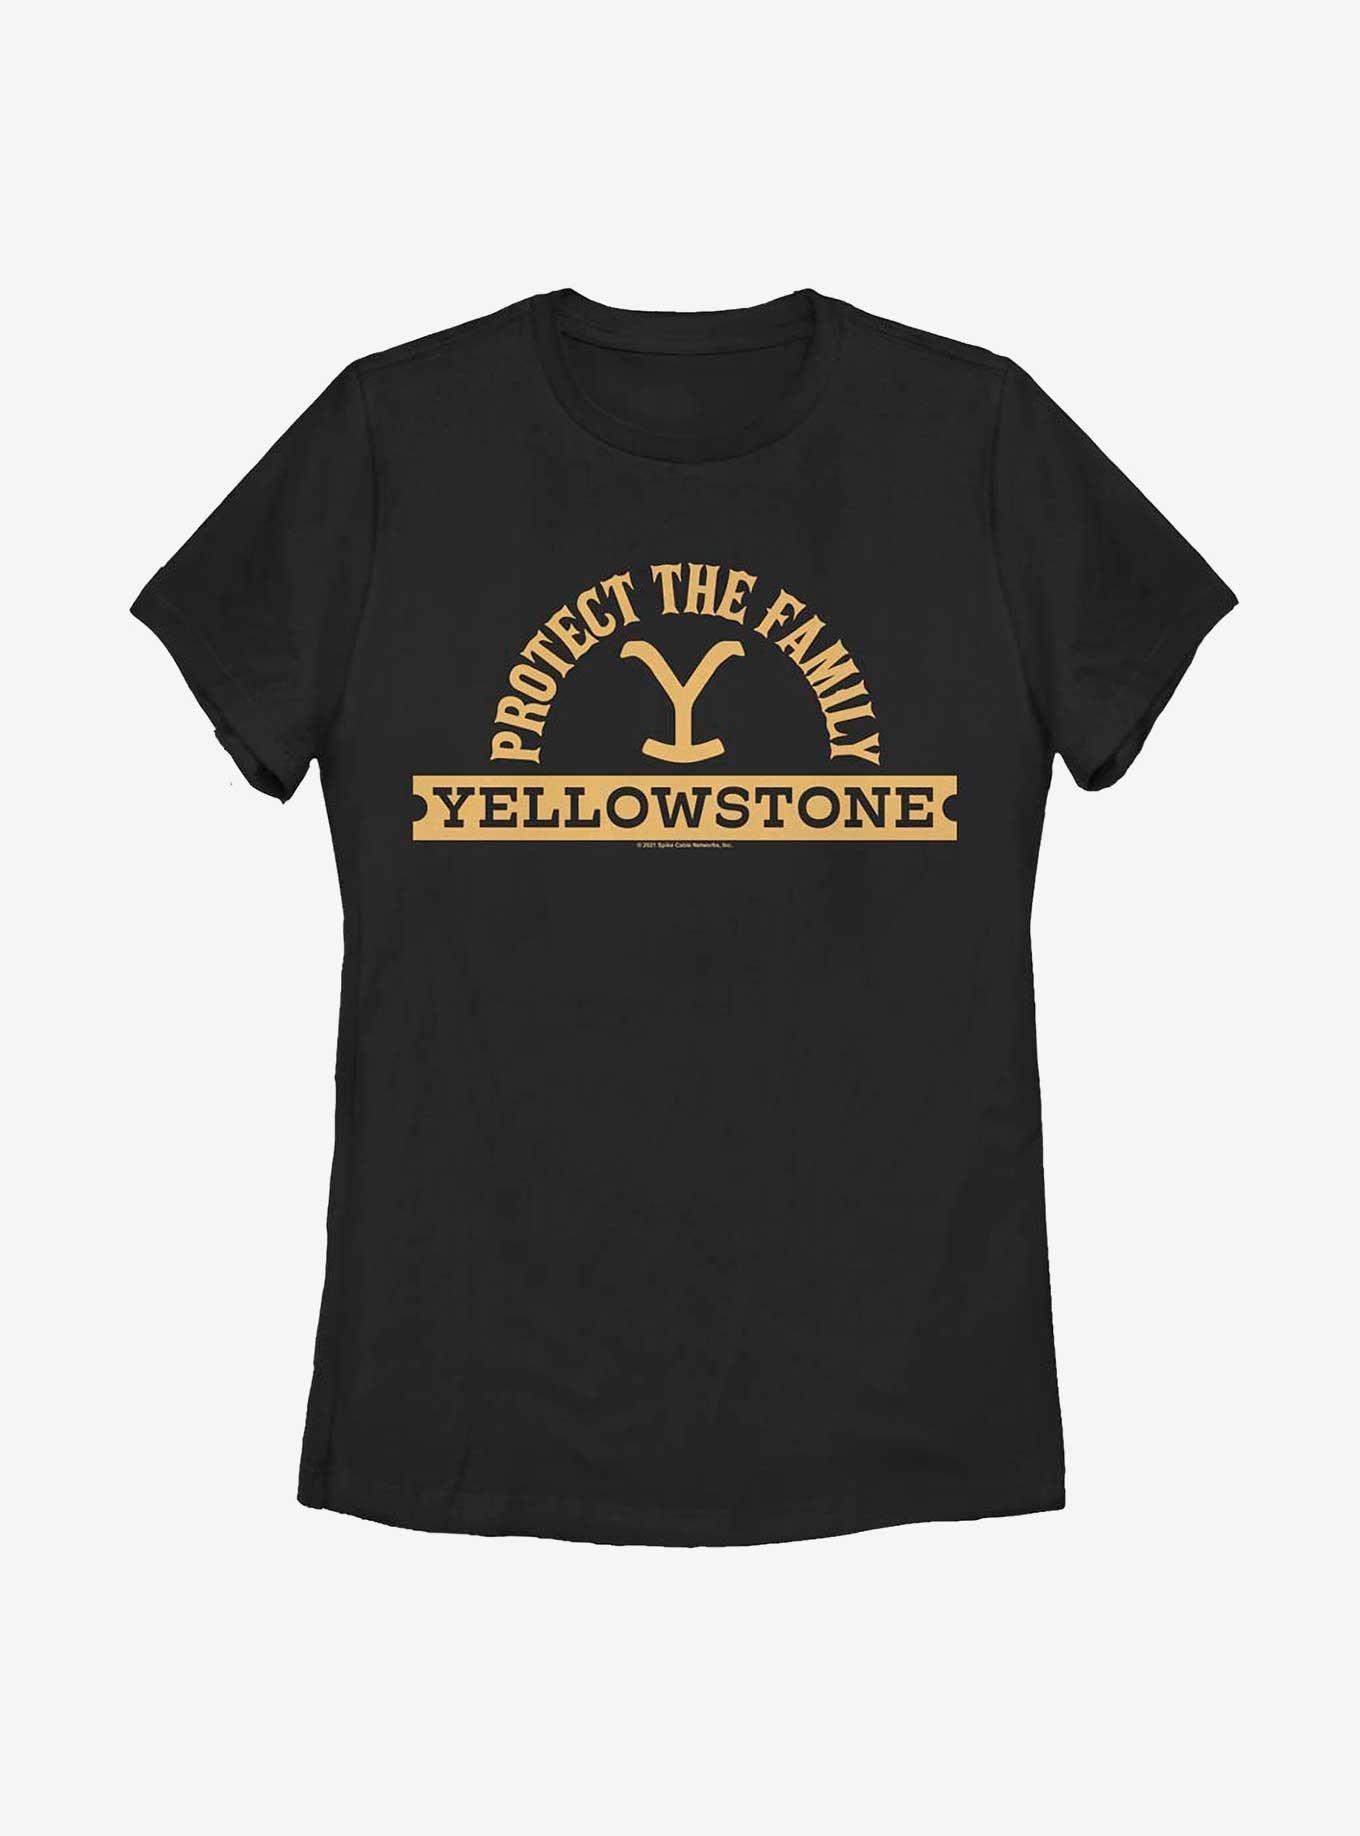 Yellowstone Protect The Family Womens T-Shirt, BLACK, hi-res